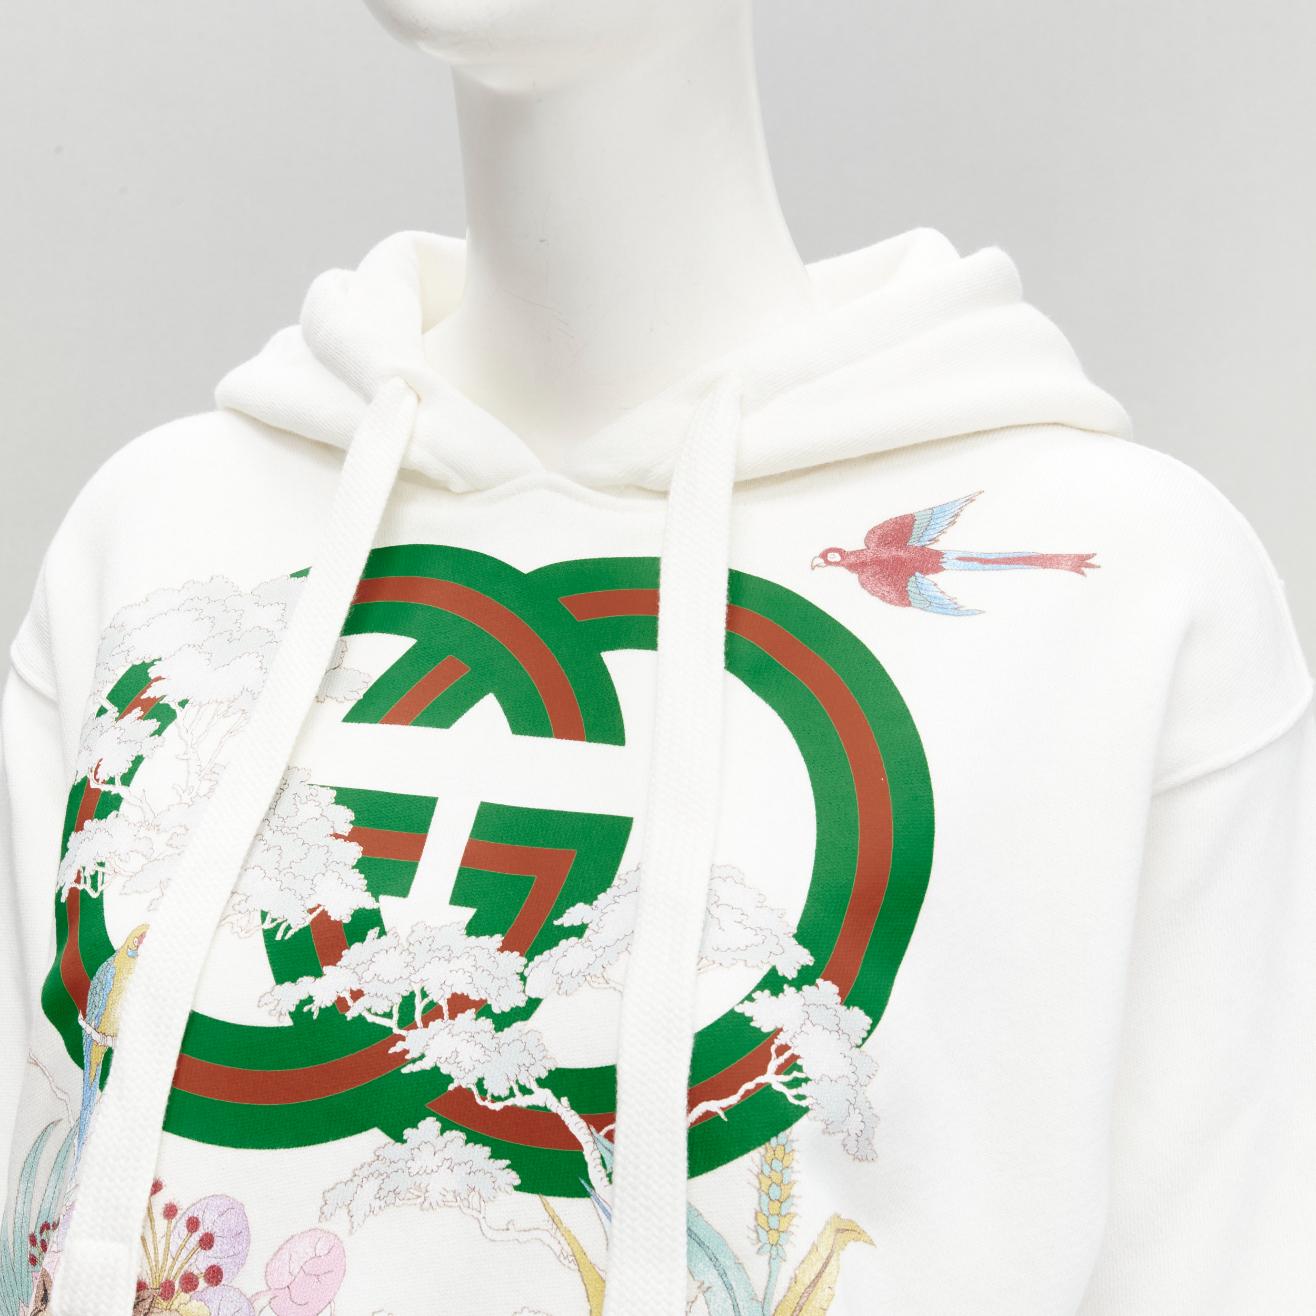 GUCCI Alessandro Michele 100% cotton white logo tiger floral print hoodie 3XS
Reference: AAWC/A00102
Brand: Gucci
Designer: Alessandro Michele
Material: Cotton
Color: Off White
Pattern: Floral
Closure: Drawstring
Made in: